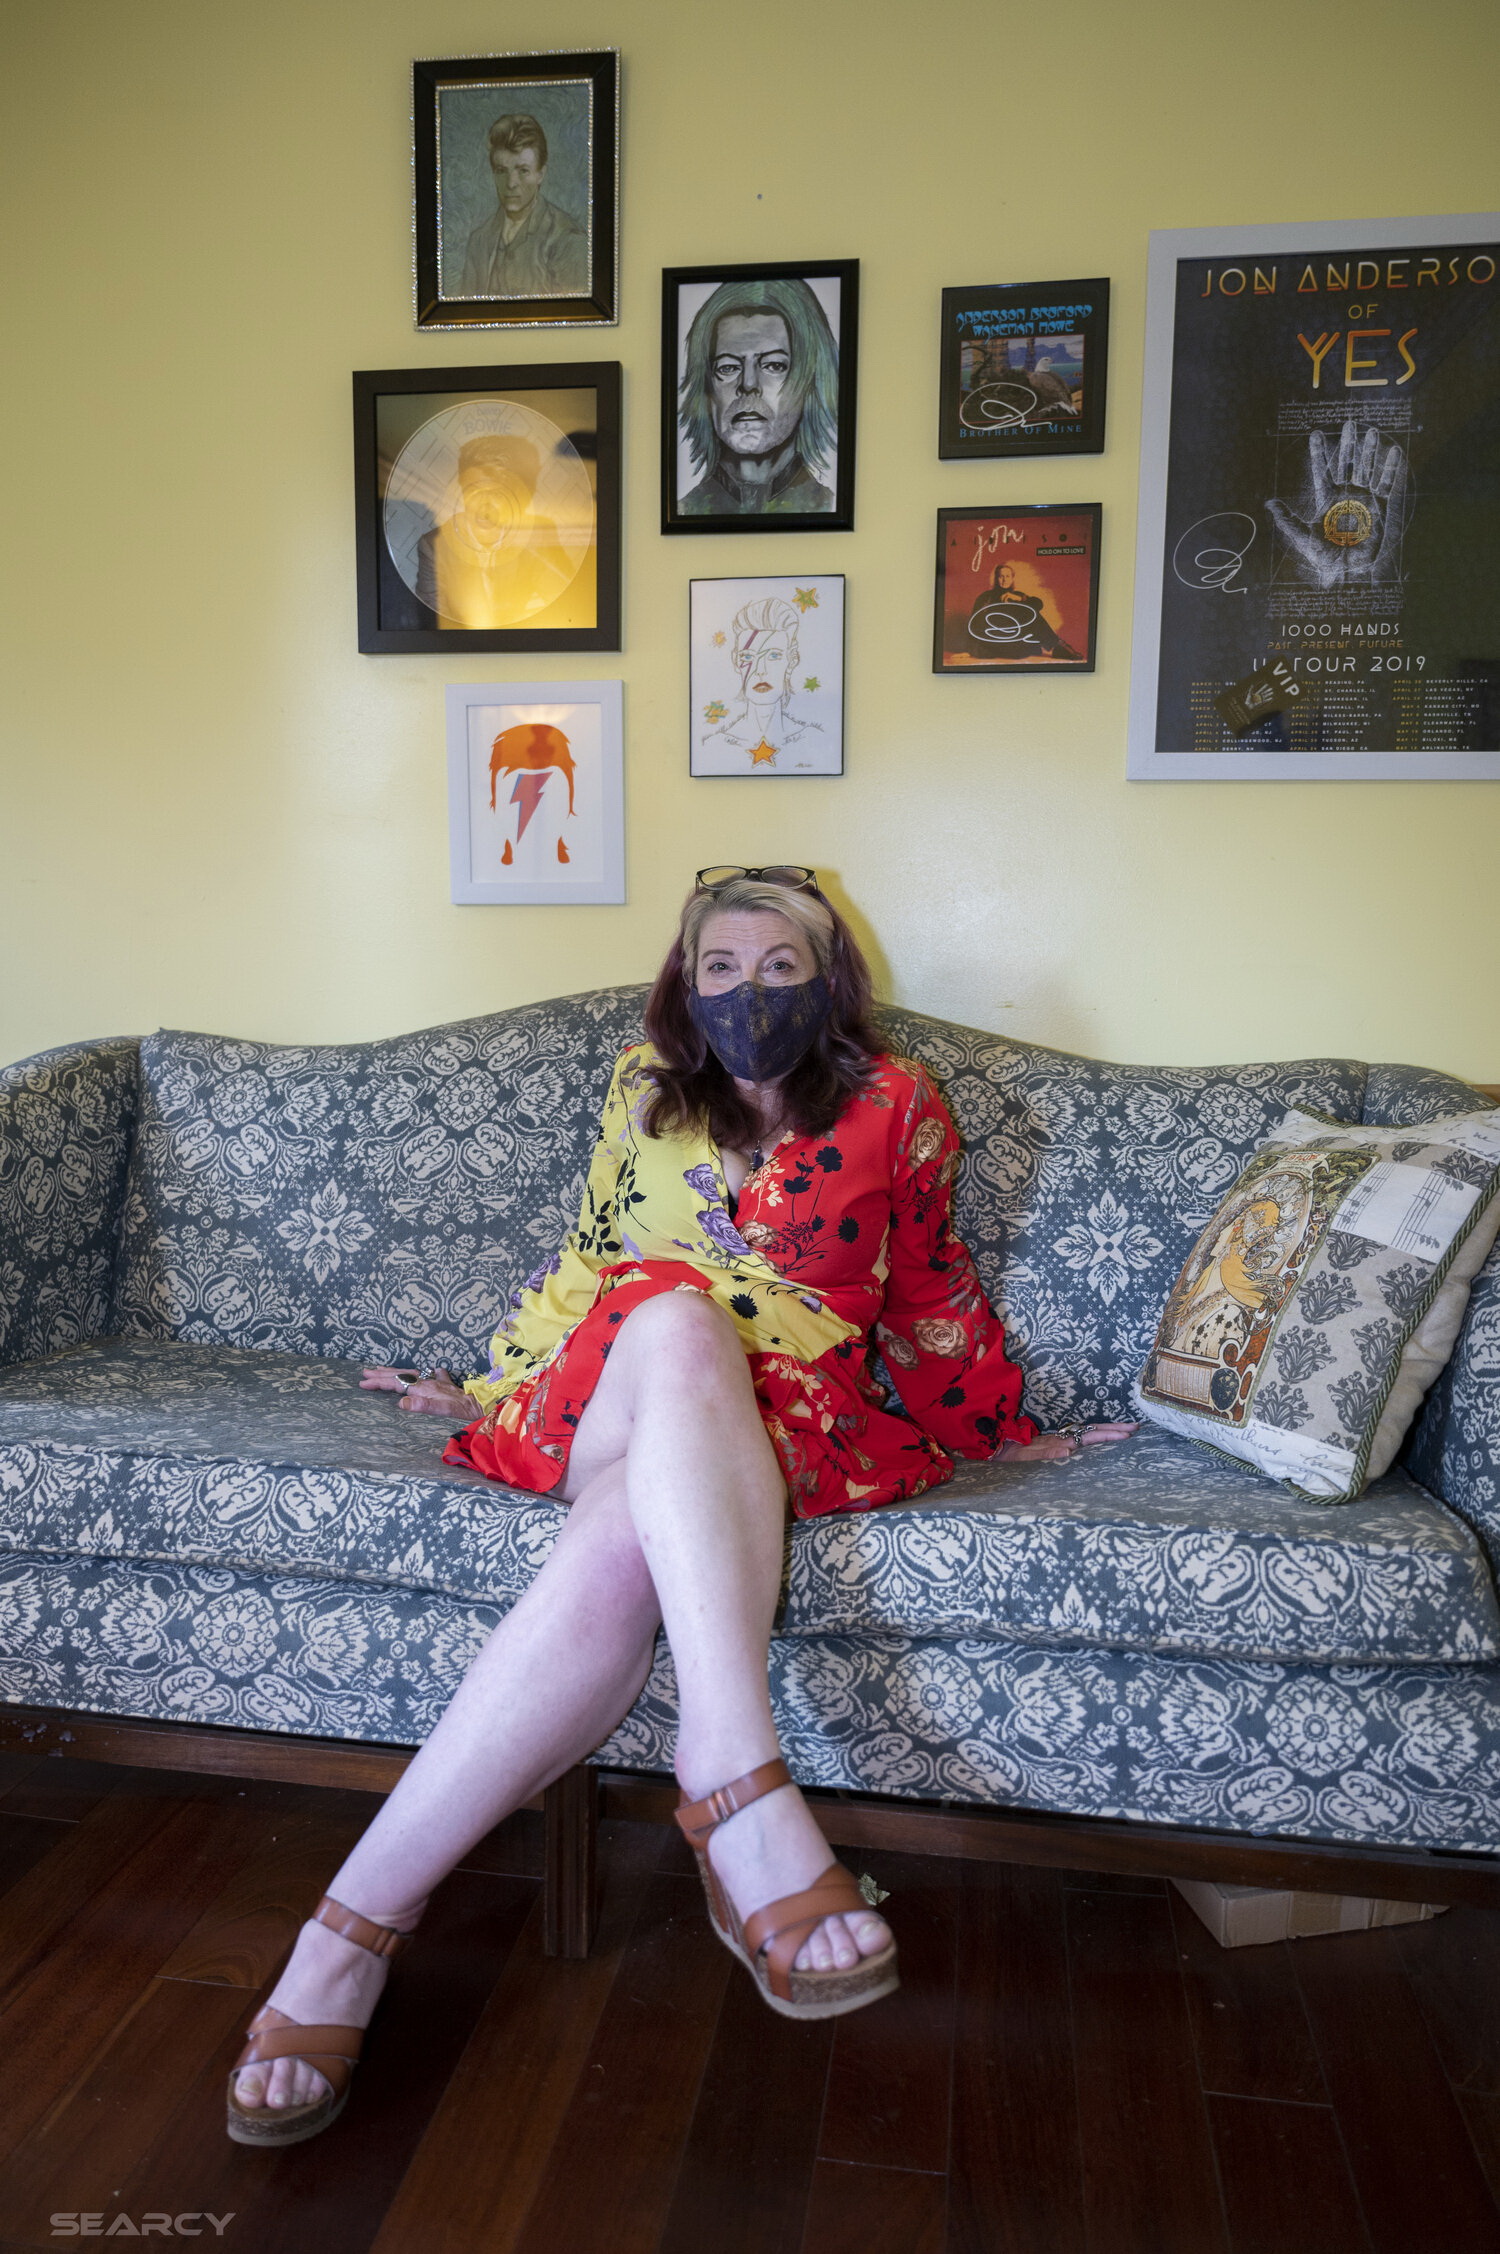 Alicia Search sitting on a blue and white couch wearing a blue mask and yellow and red flowery dress. She has her legs crossed and wearing sandals. on the wall behind her lots of David Bowies posters and prints.